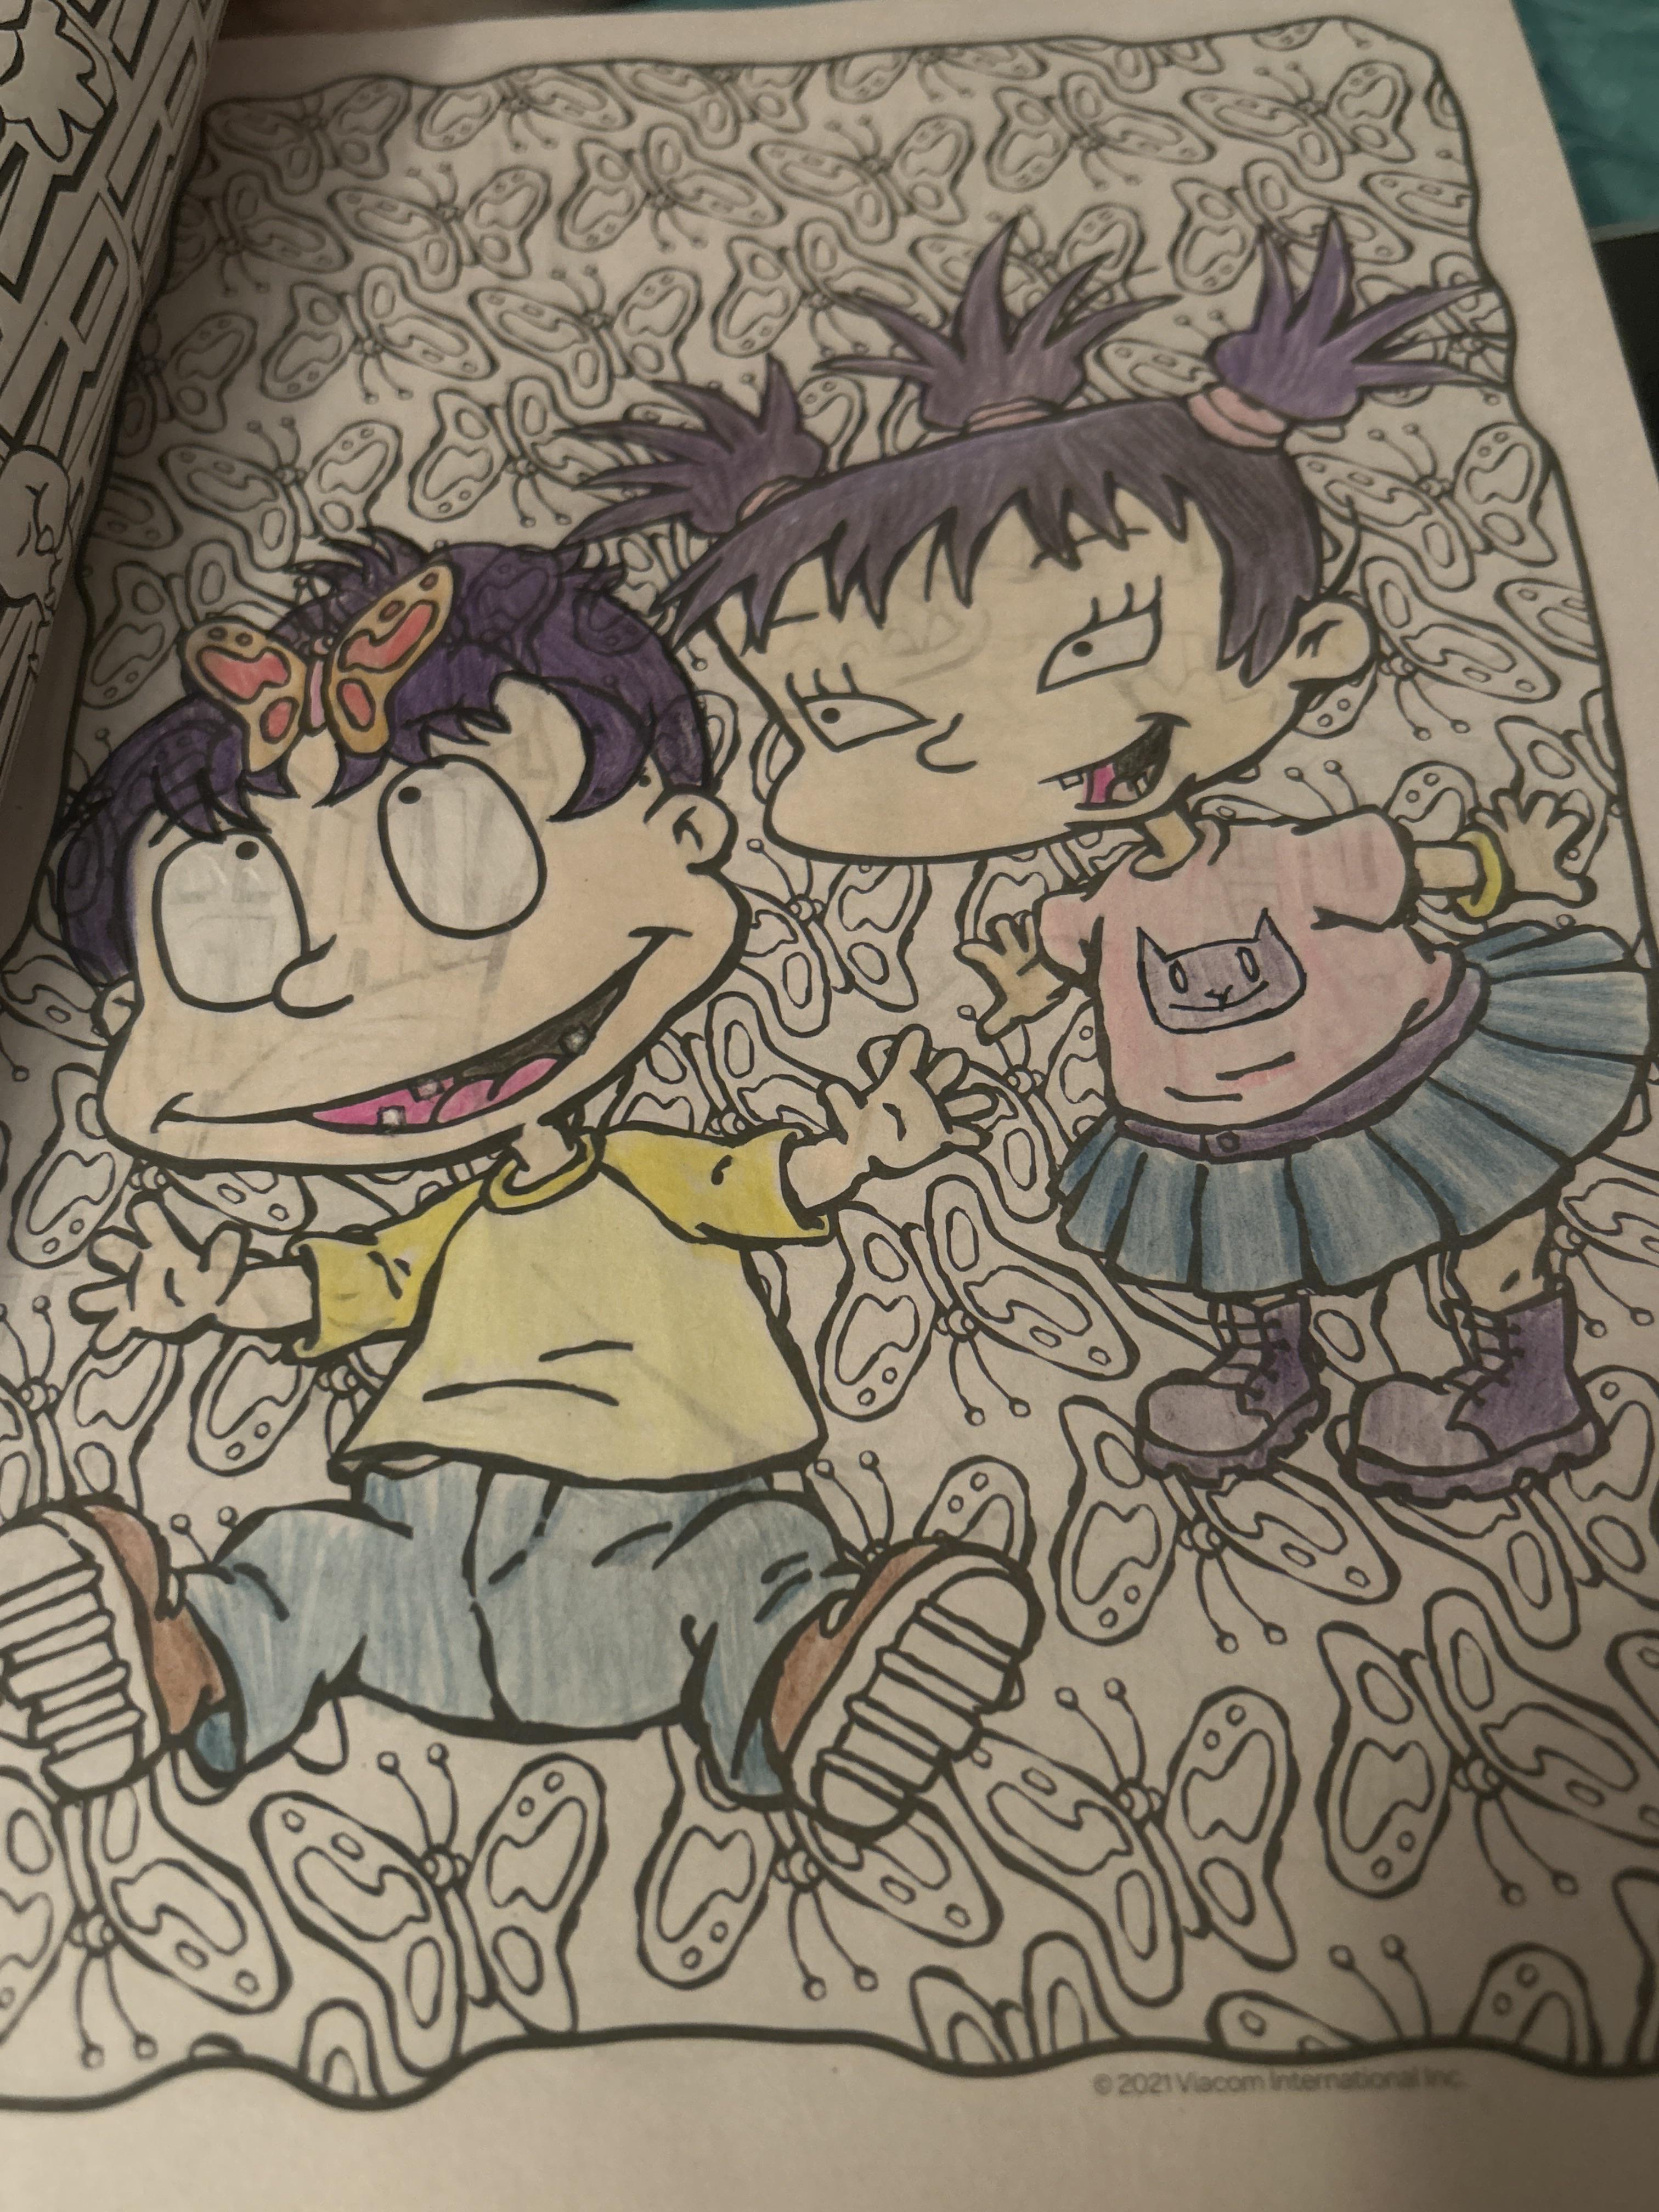 Got my hands on a rugrats coloring book made some modifications to tommy to look like how i imagine him at rrugrats